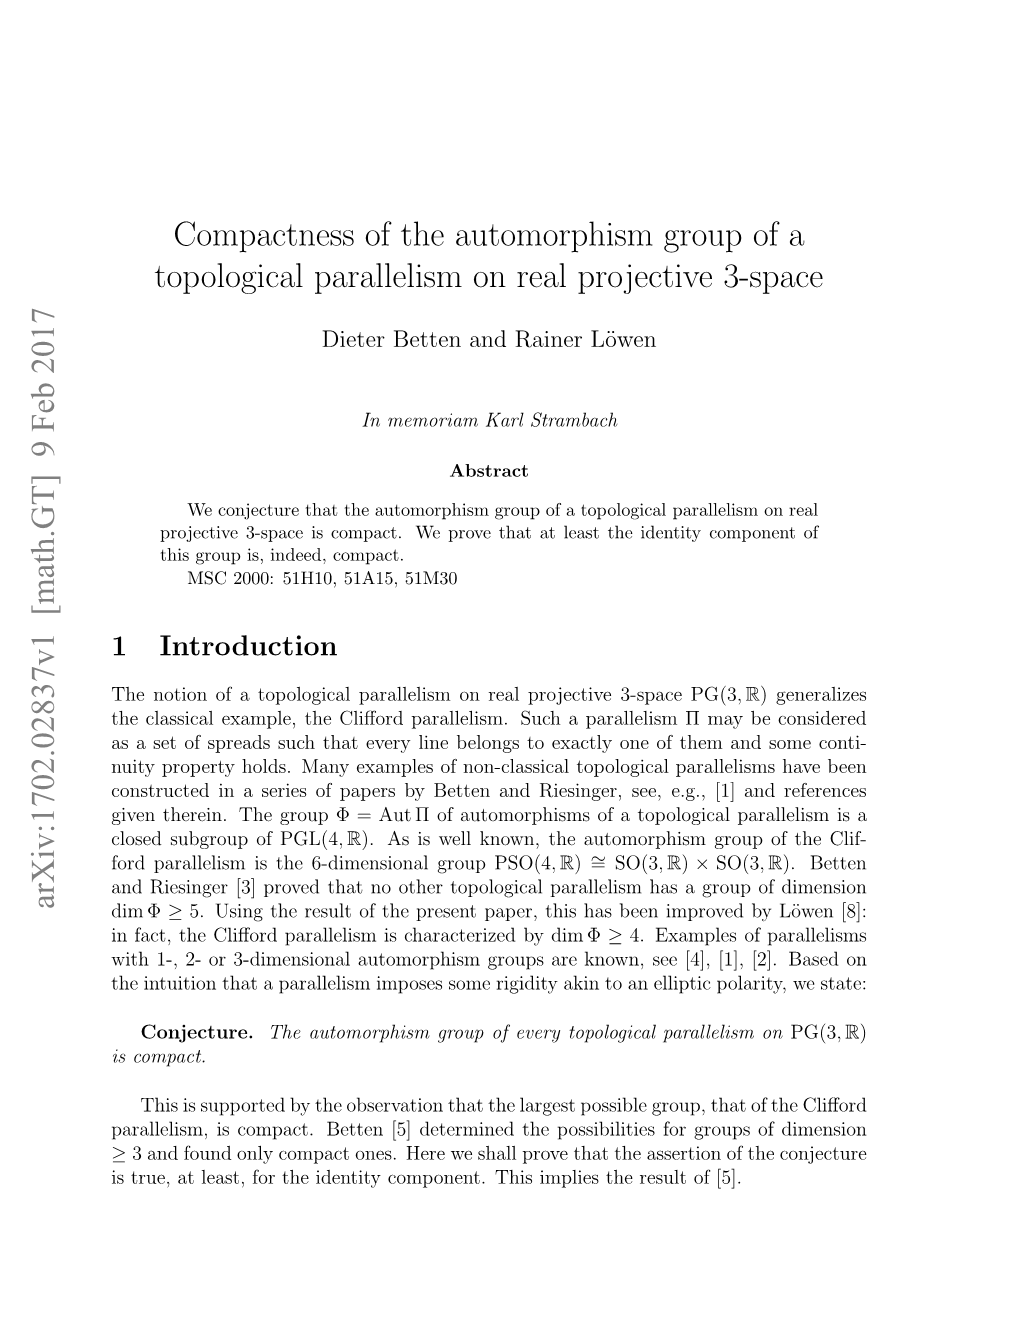 Compactness of the Automorphism Group of a Topological Parallelism on Real Projective 3-Space